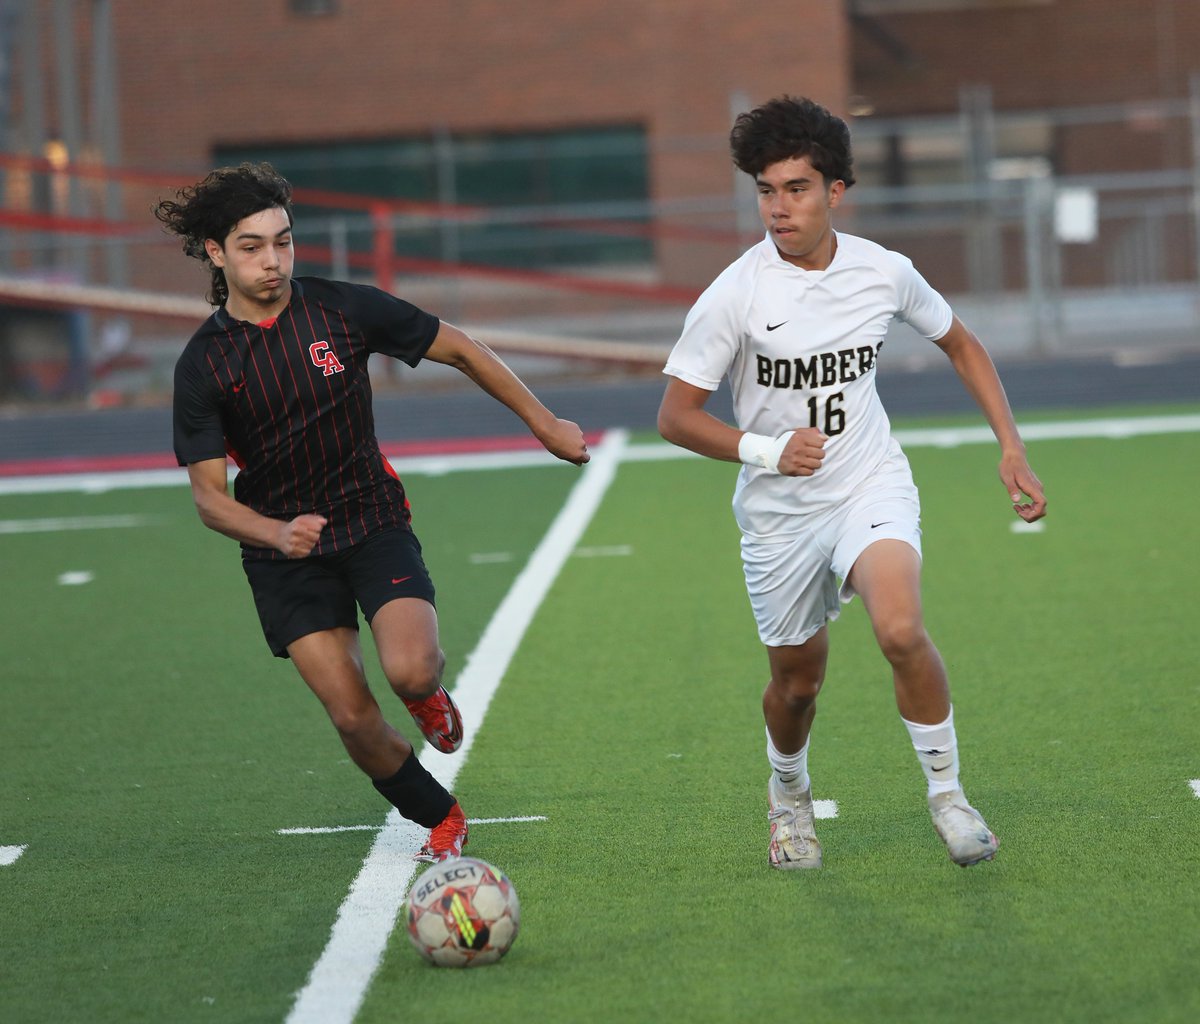 The Carl Albert boys clinched a playoff berth with a 2-0 win over Midwest City on Tuesday night. Garrett Wright and Mitchell Zebert scored for the Titans. They will close out the regular season Friday against El Reno. #okpreps